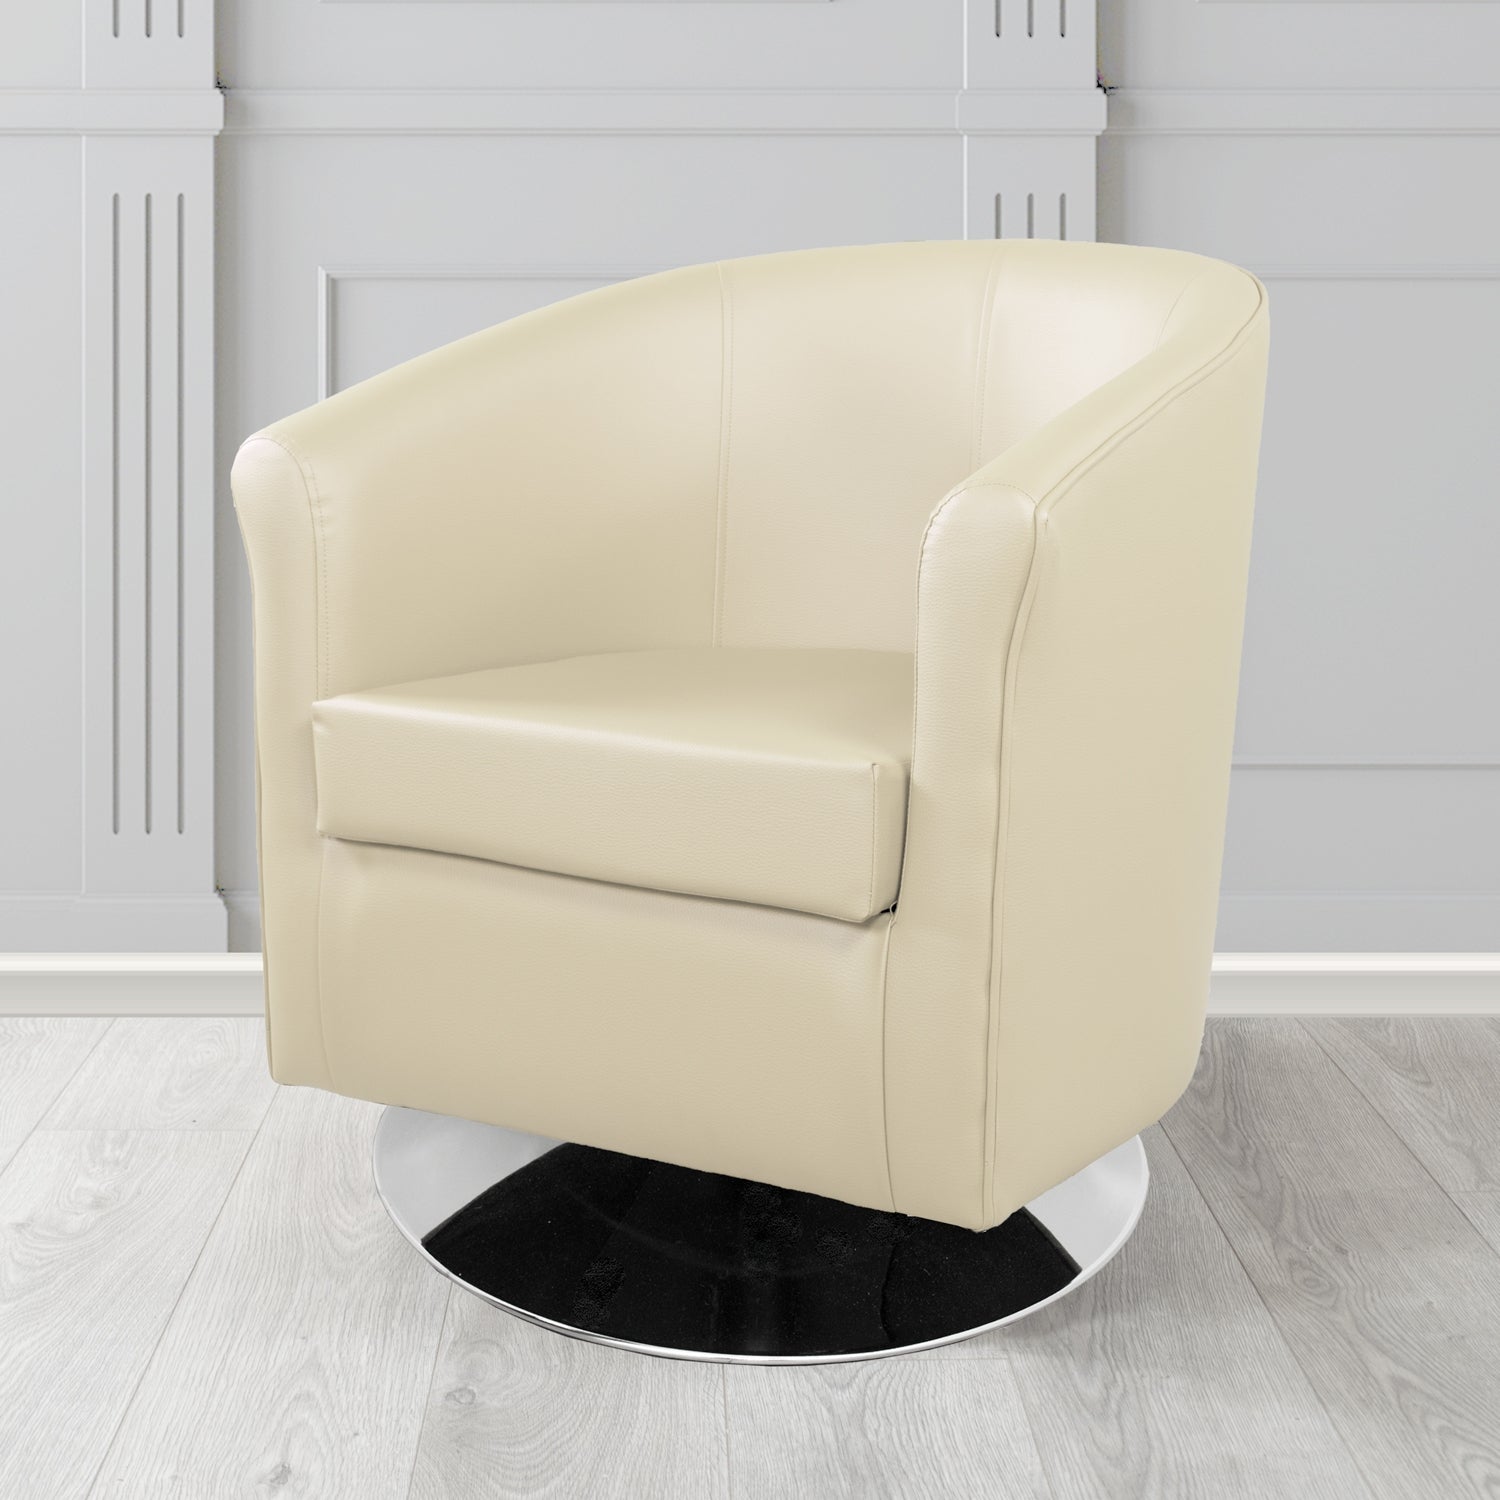 Tuscany Swivel Tub Chair in Madrid Cream Faux Leather - The Tub Chair Shop